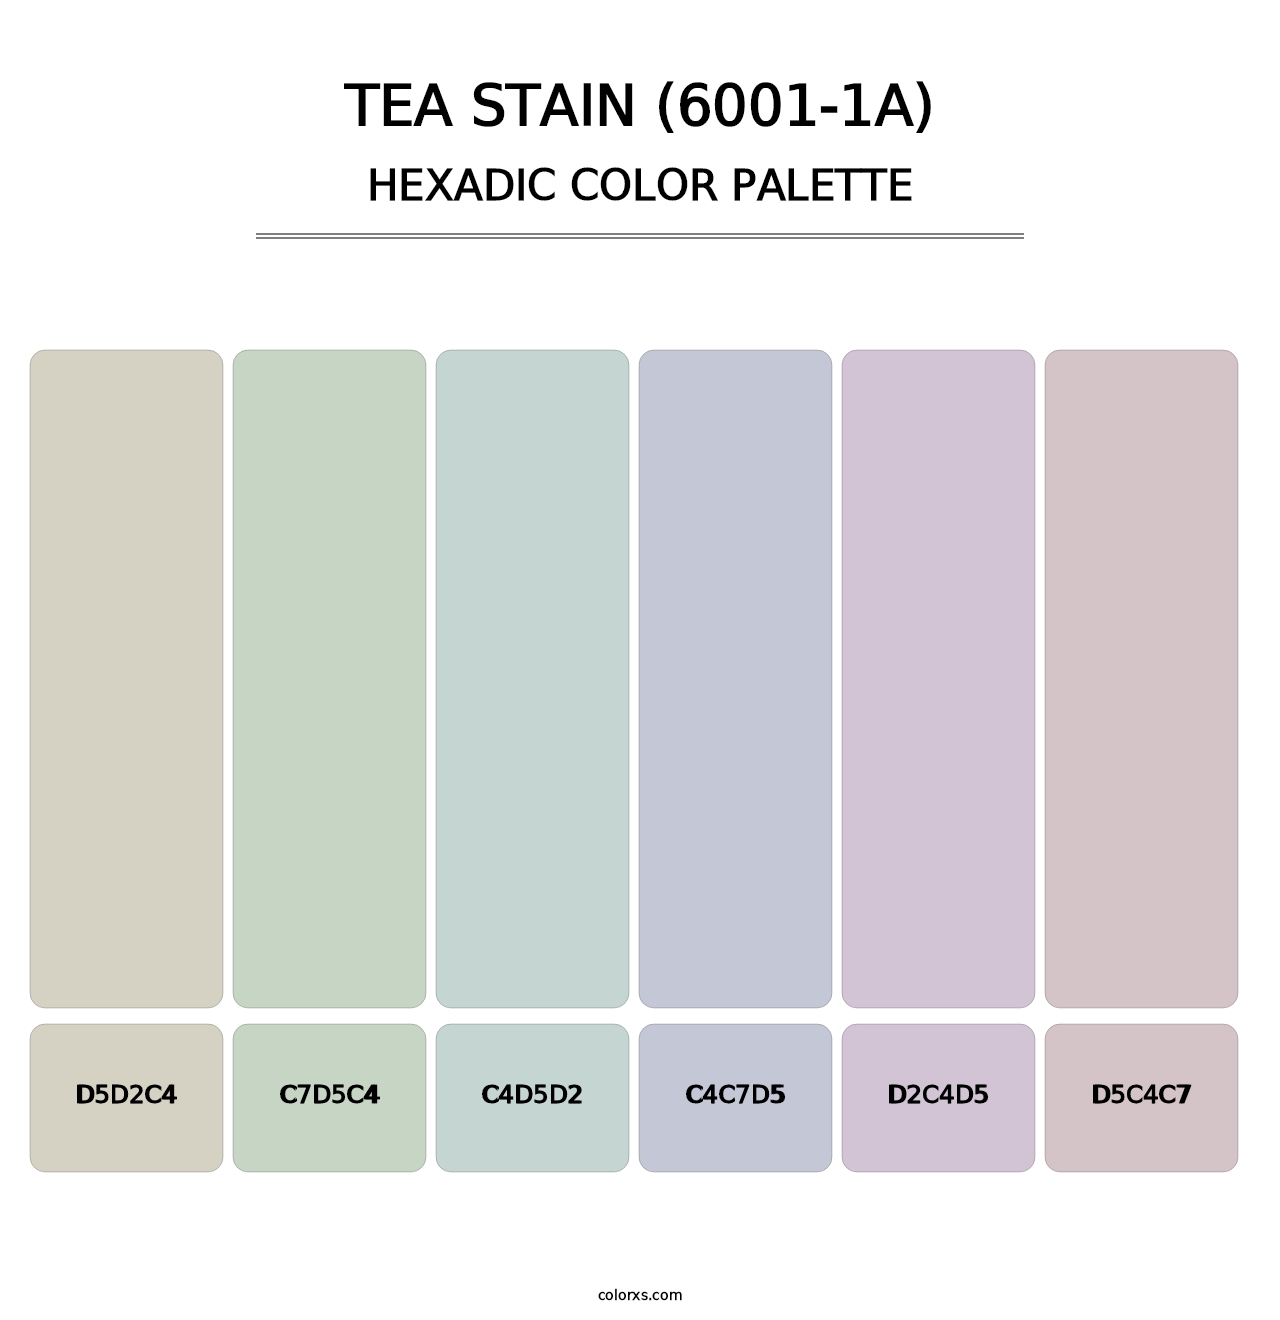 Tea Stain (6001-1A) - Hexadic Color Palette